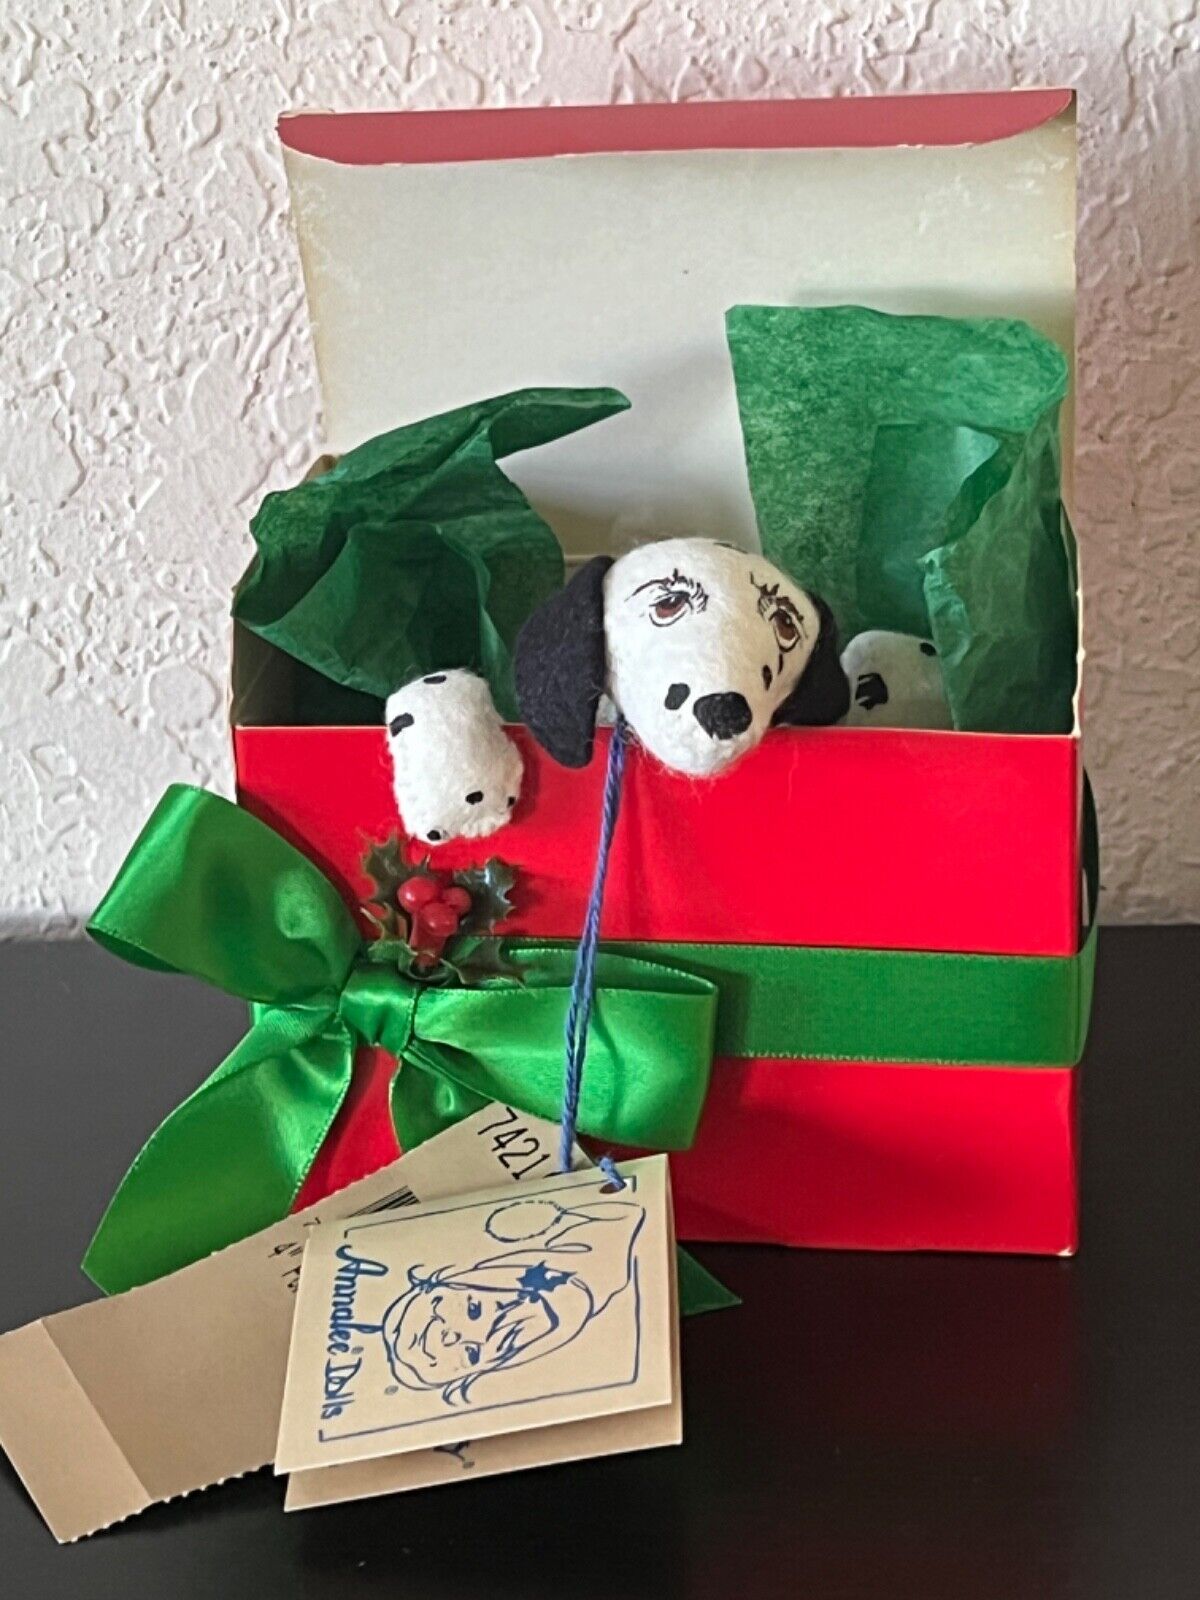 Annalee Dolls 4” DALMATIAN PUPPY DOG PRESENT in Red Gift Box  #7421 with Tag